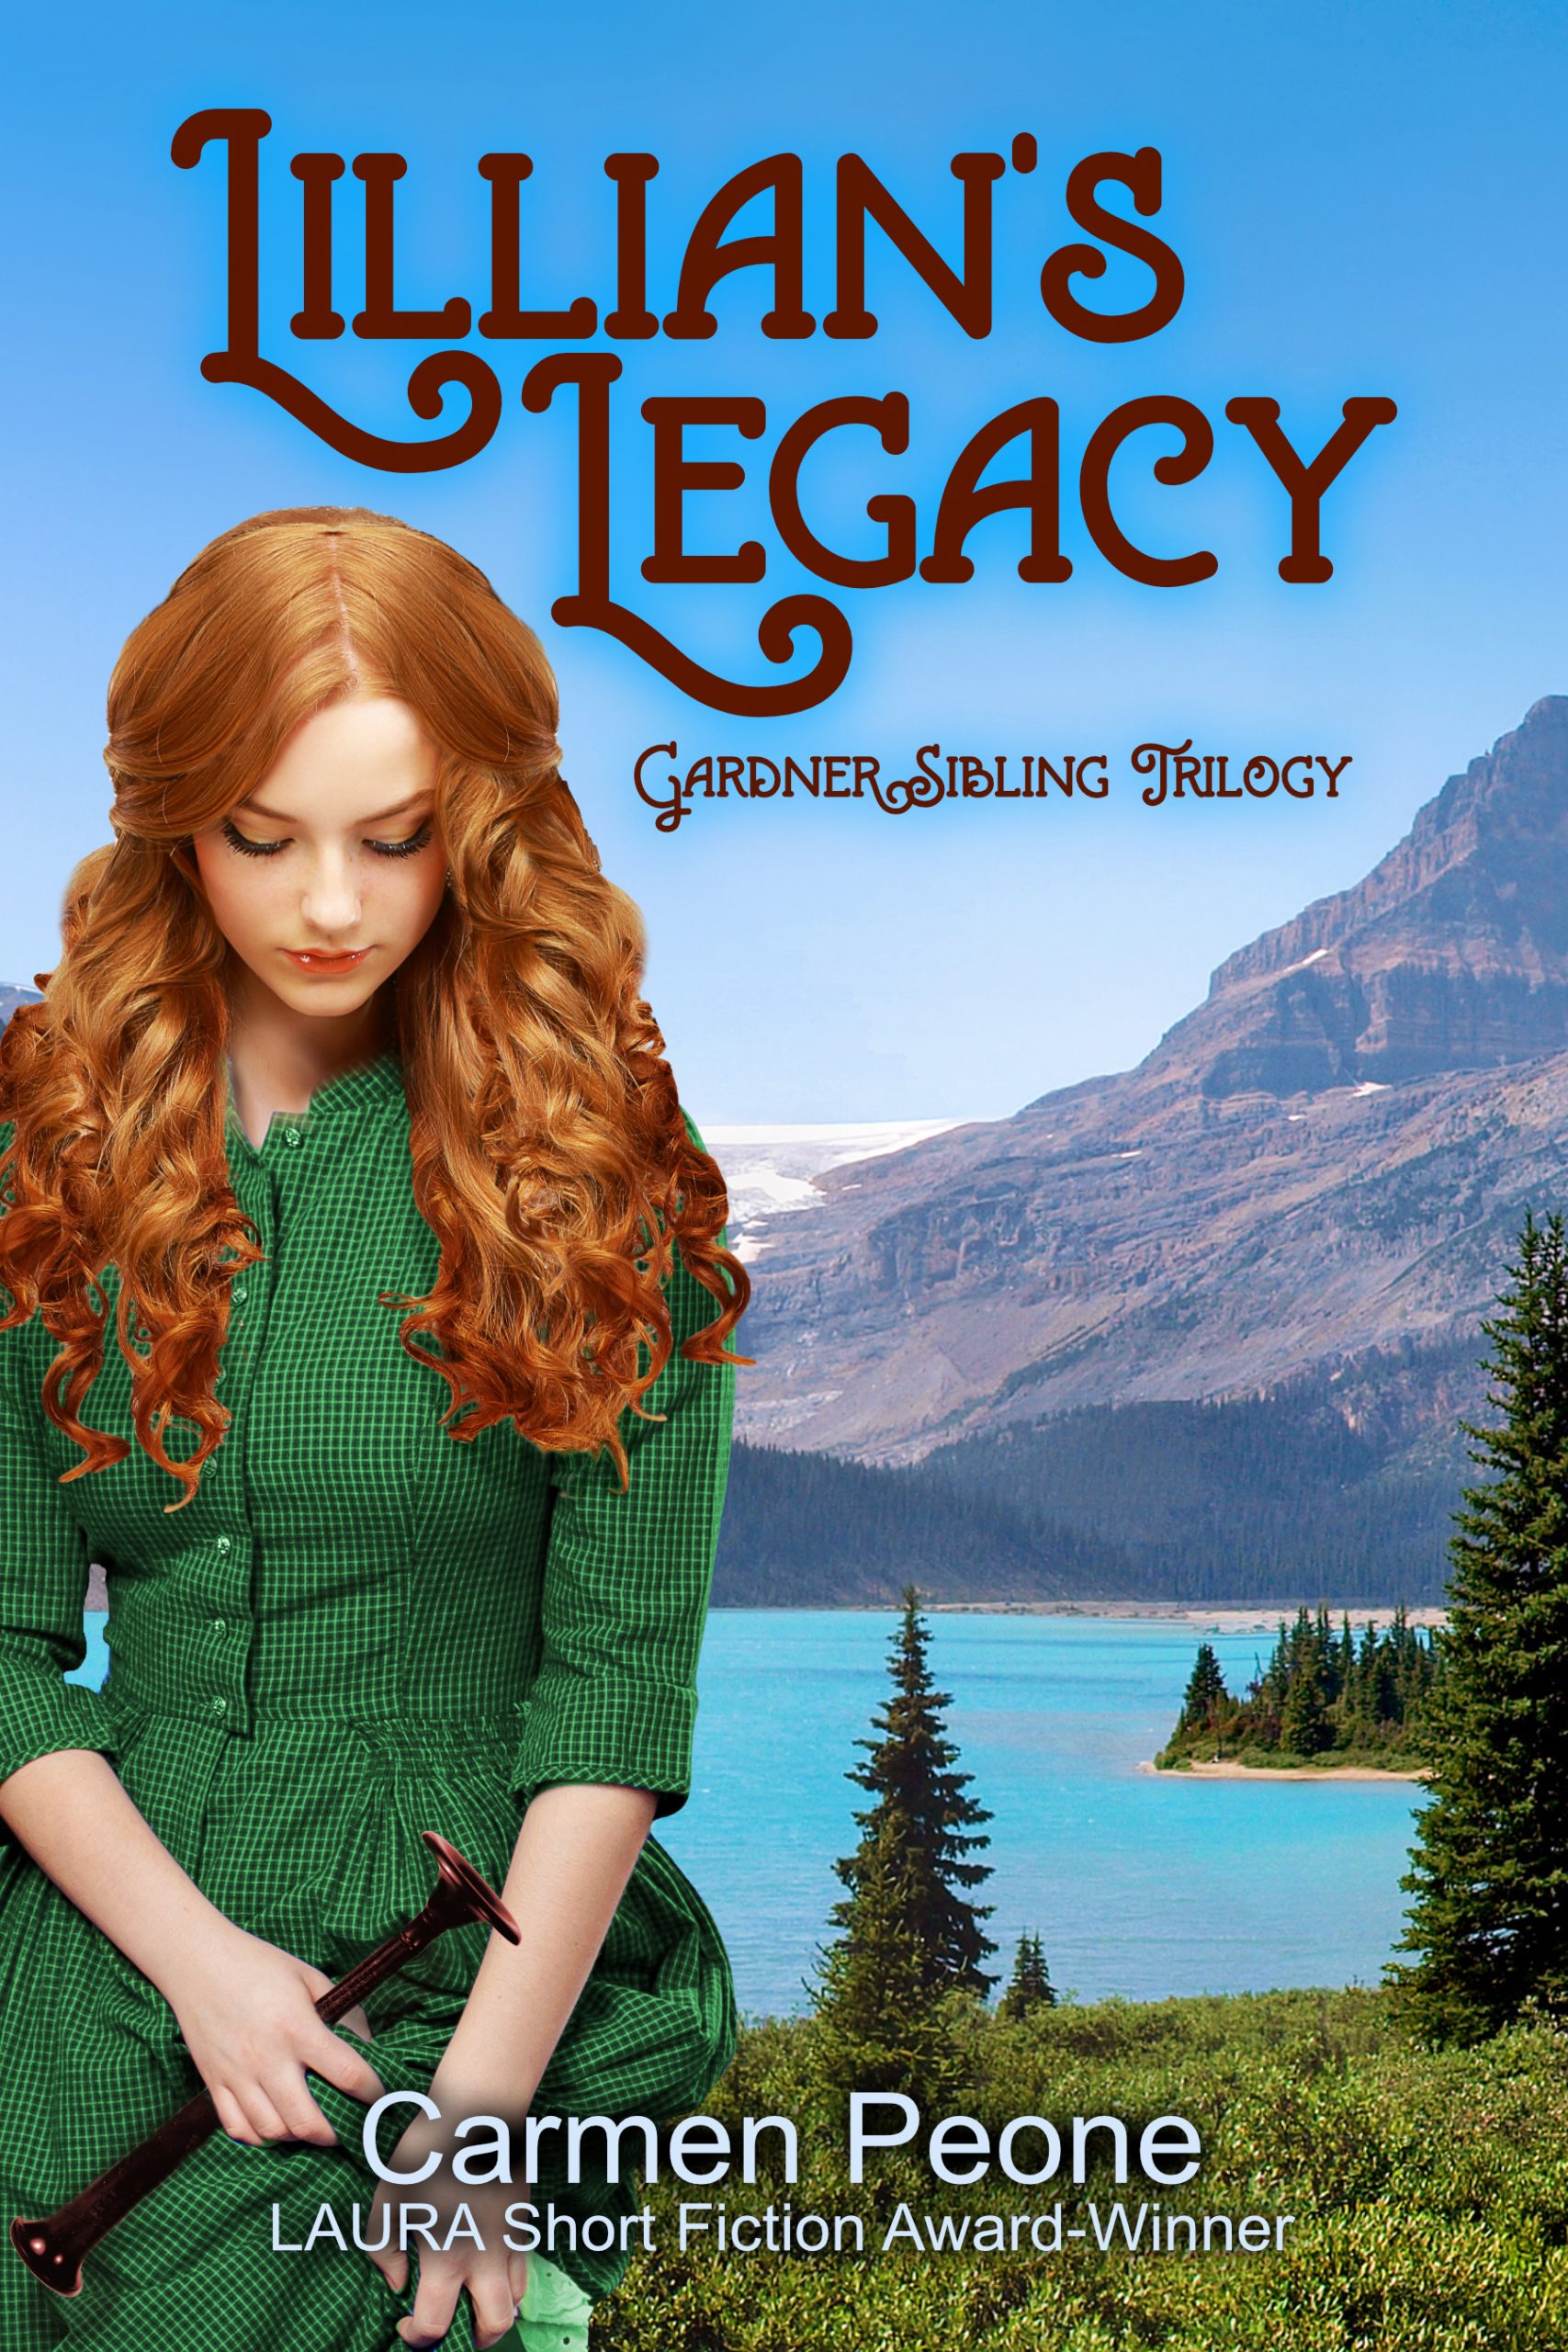 Designing the Cover for Lillian’s Legacy